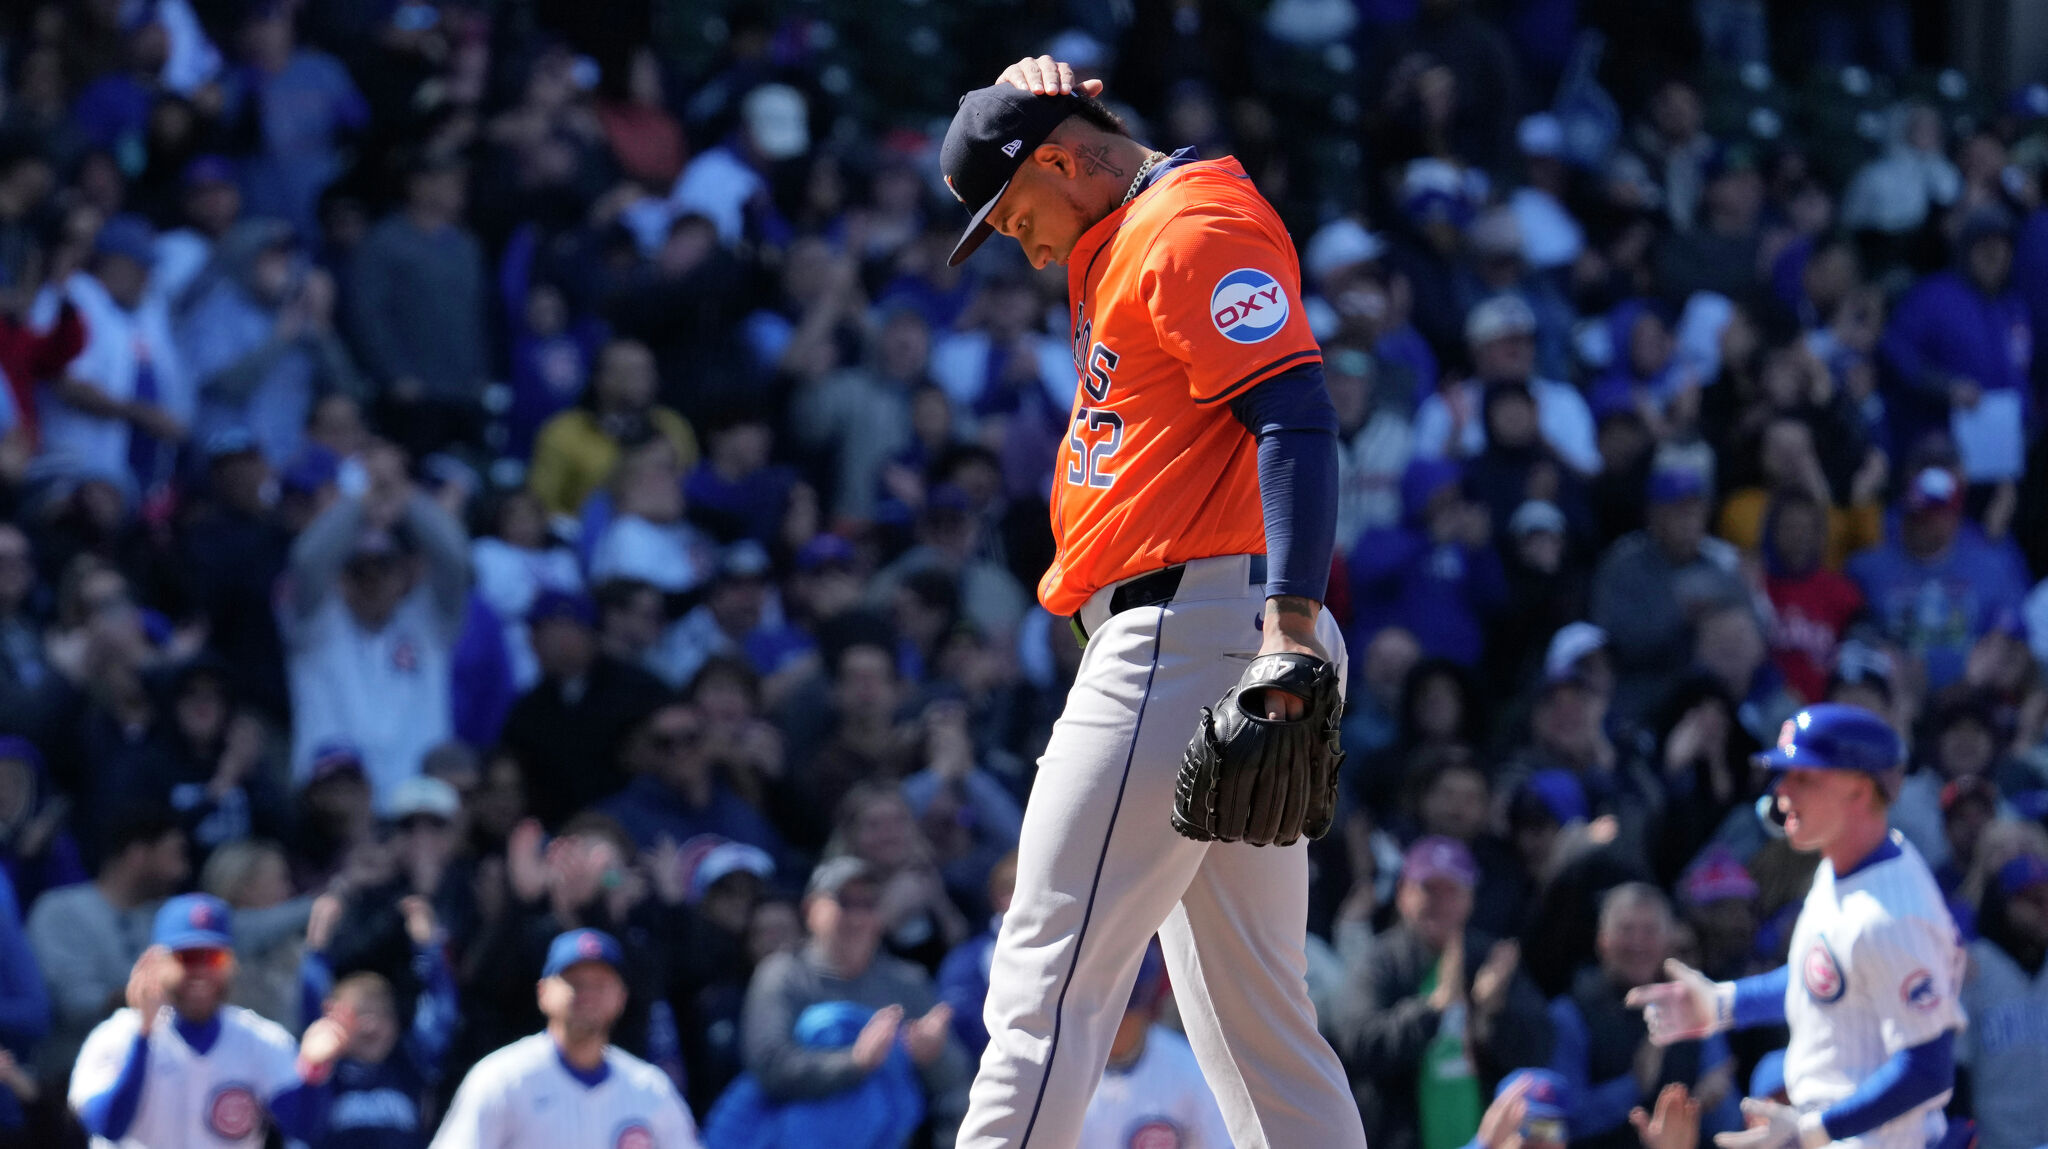 Houston Astros: Cubs complete sweep as losing streak reaches 5